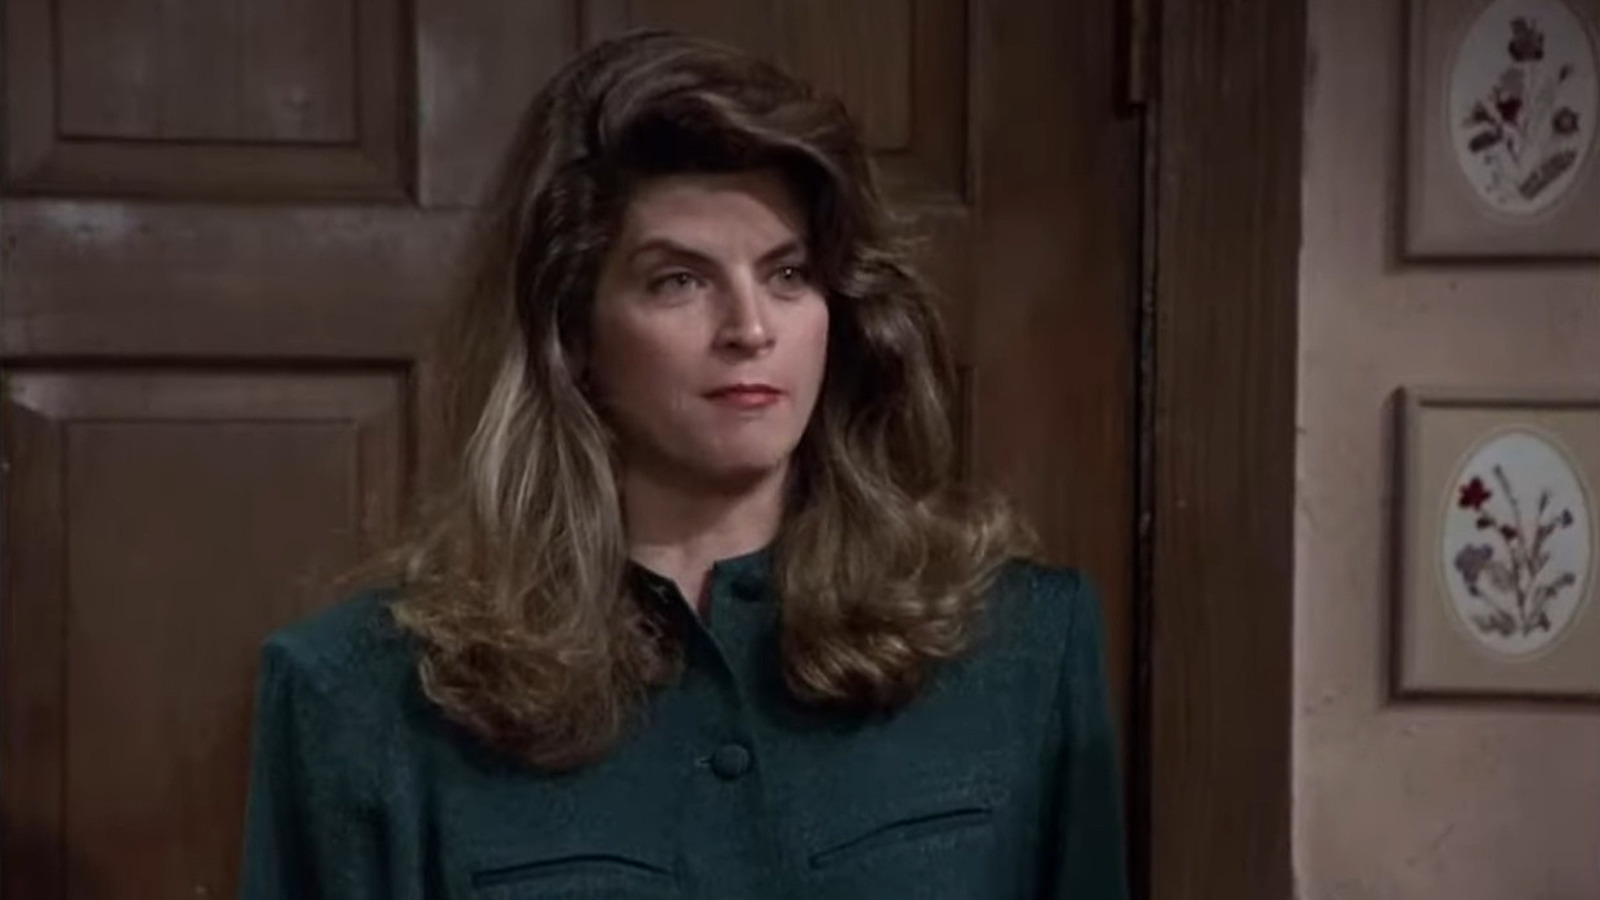 The Improvised Kirstie Alley Moment That Unlocked Rebecca For Cheers’ Writers